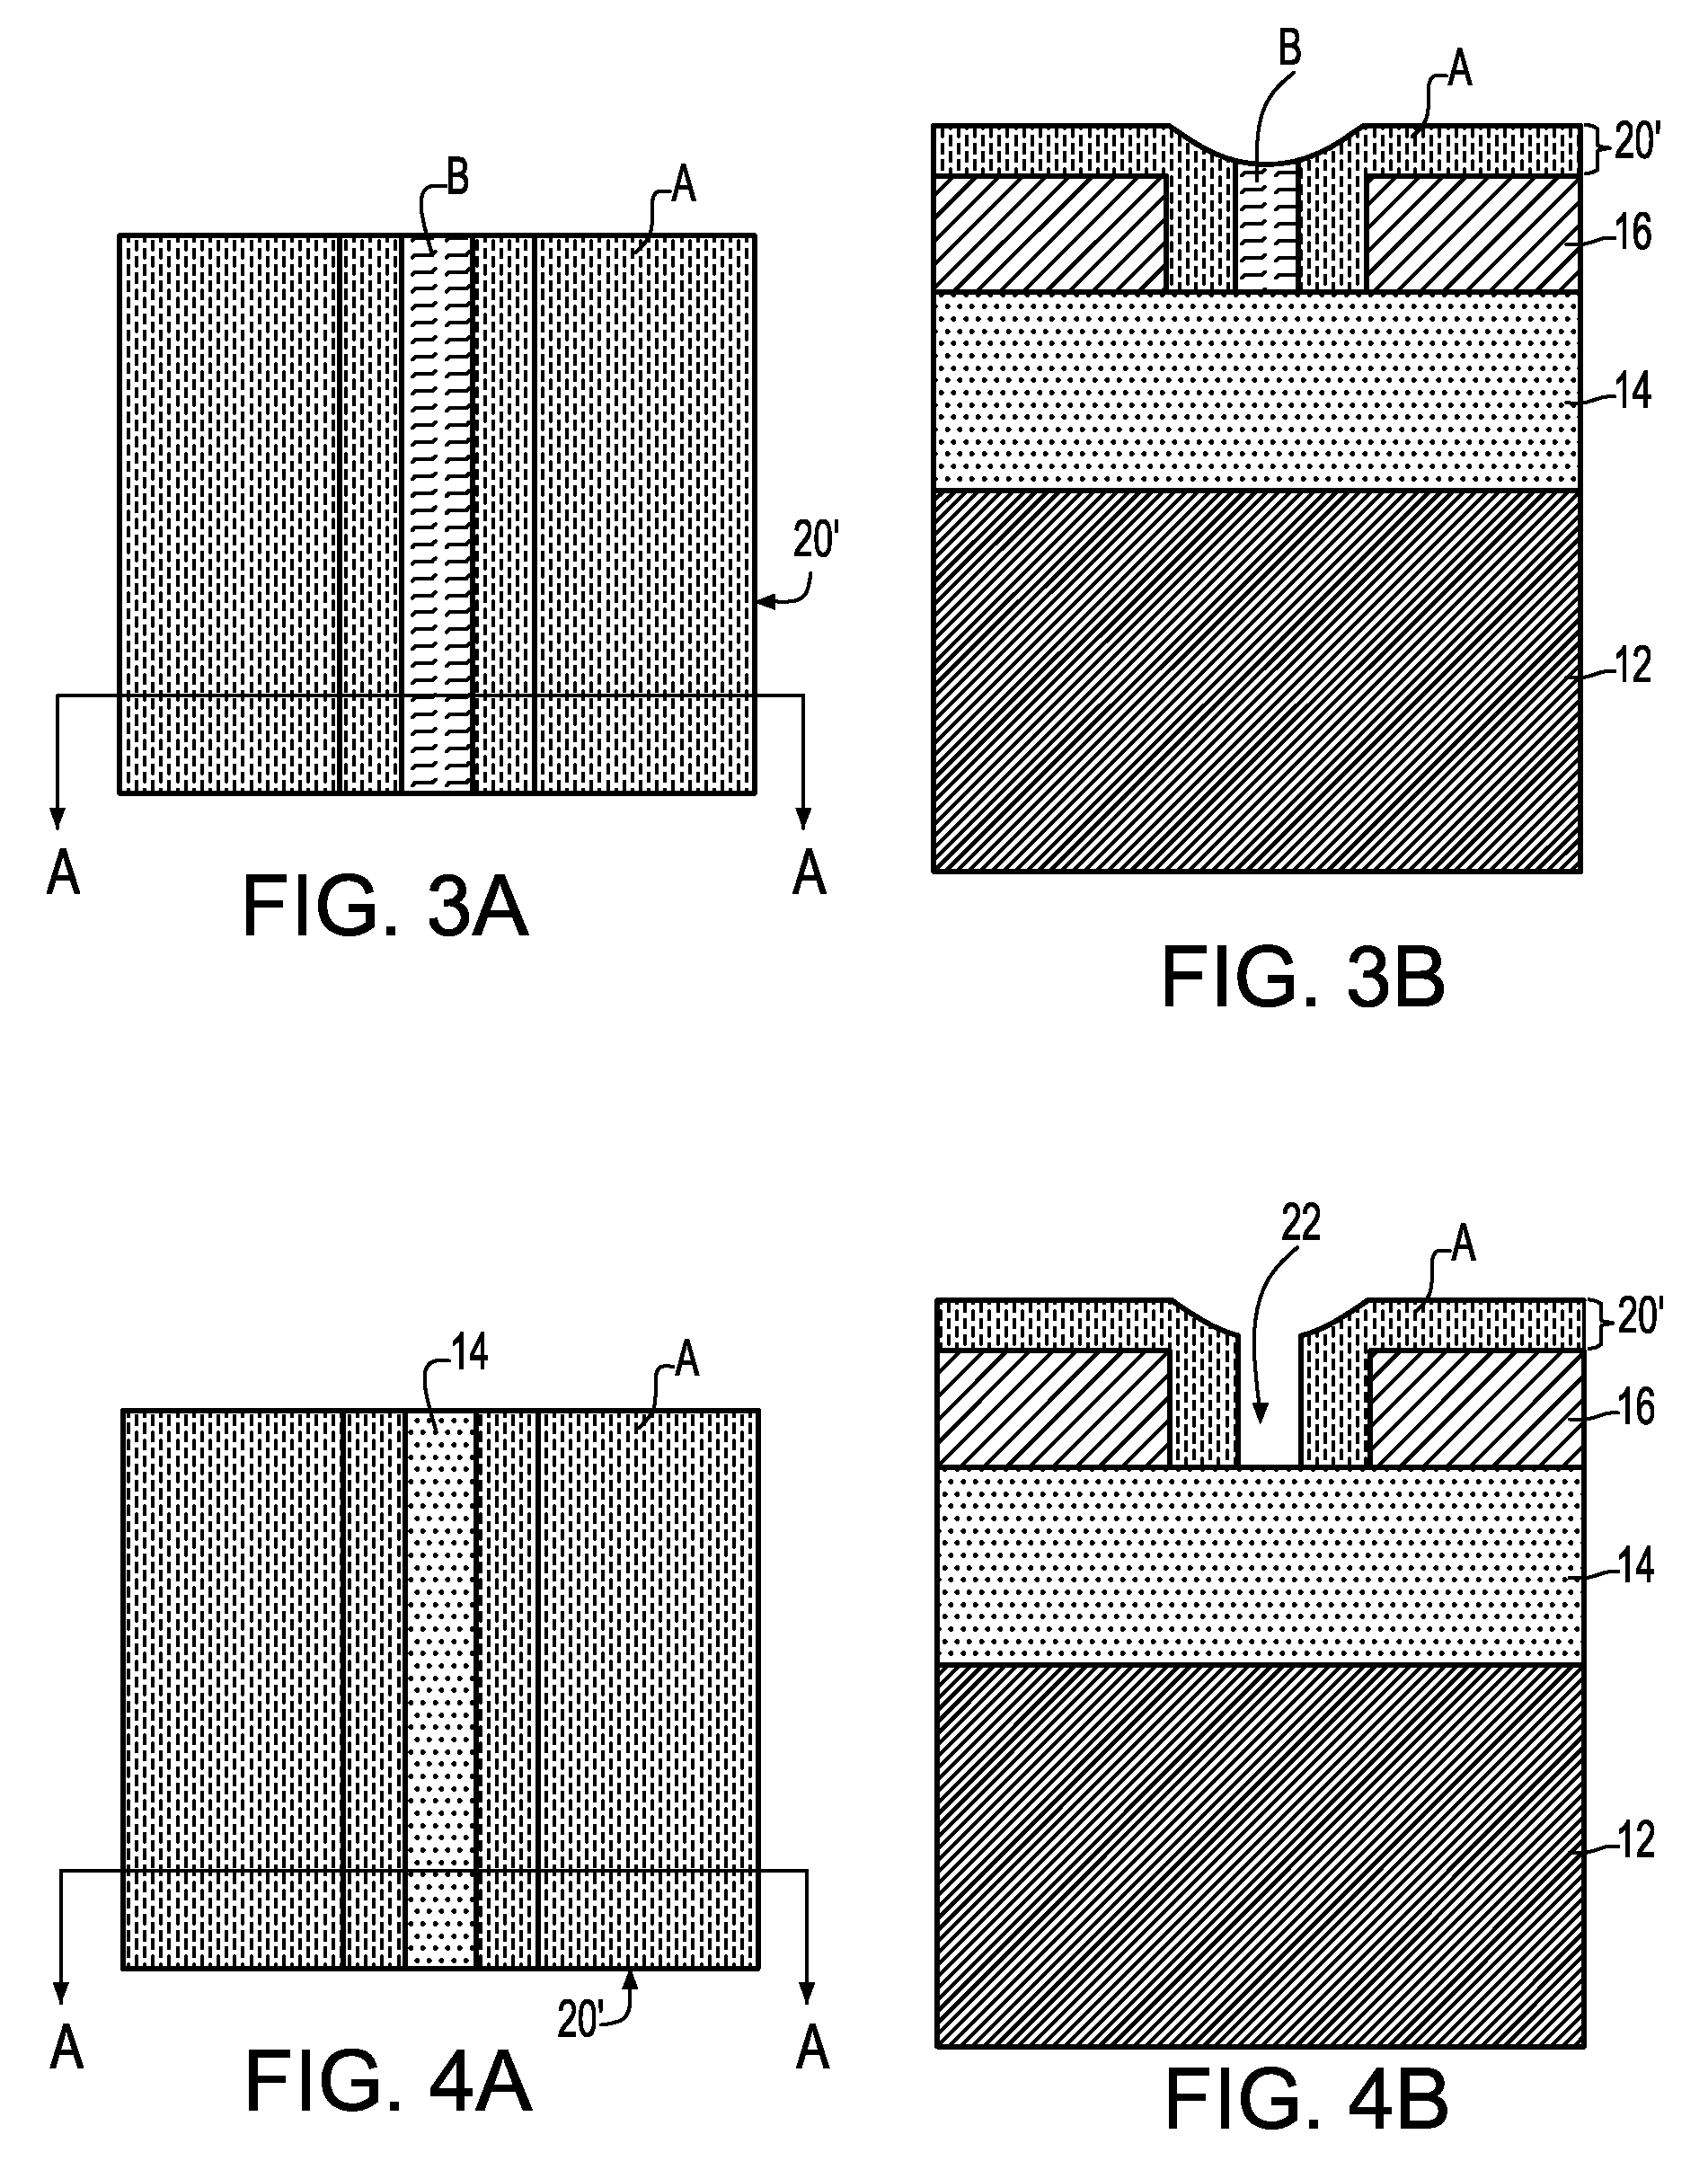 Sub-lithographic gate length transistor using self-assembling polymers